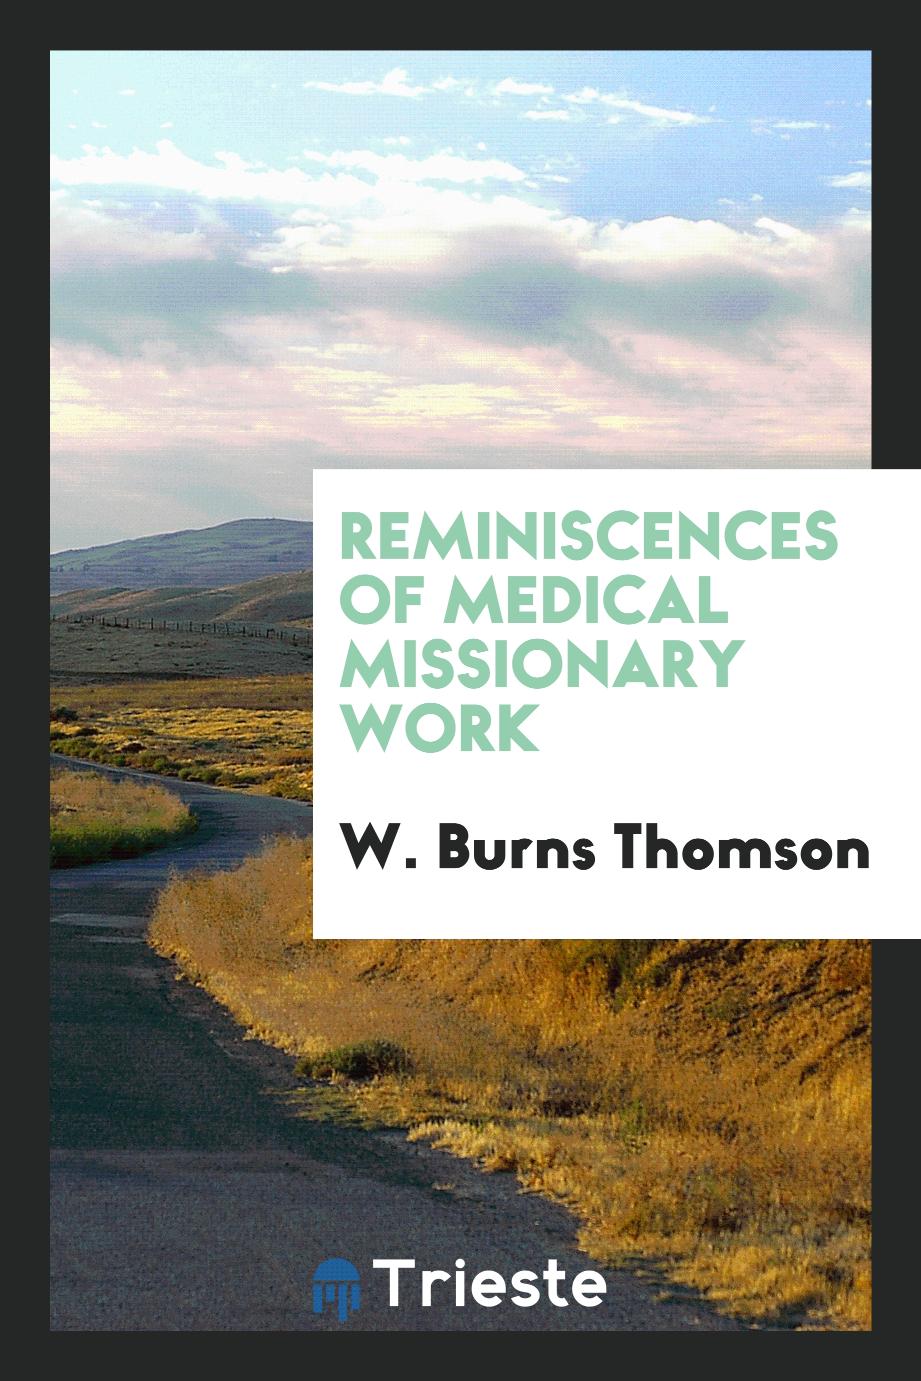 Reminiscences of medical missionary work